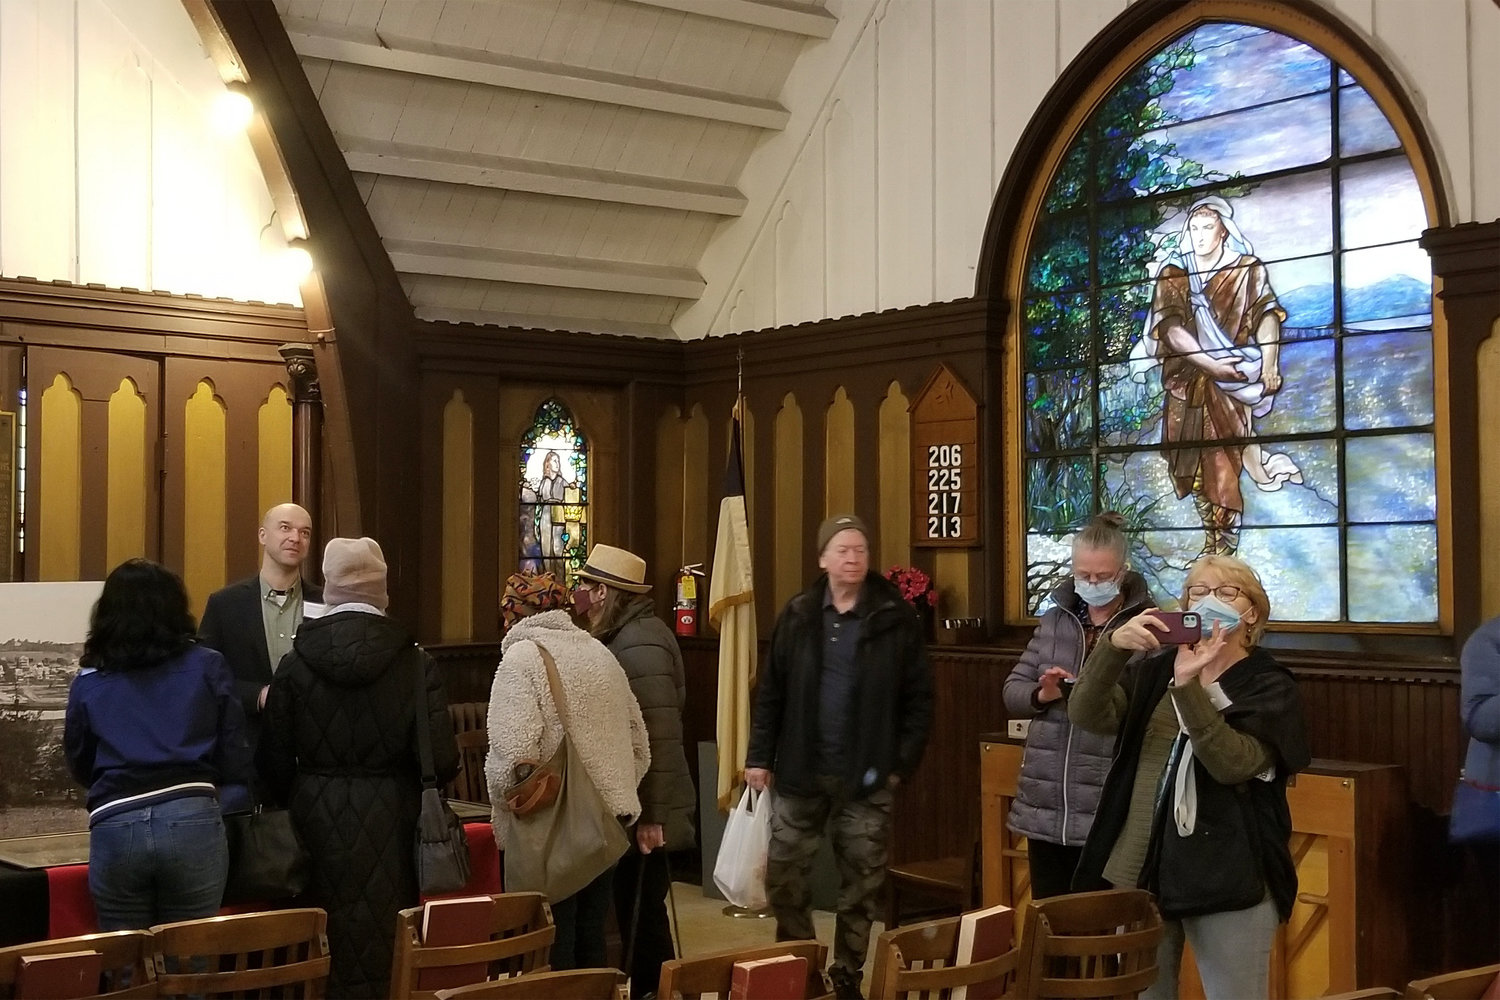 Members of the public glimpsed at some of the treasures inside Edgehill Church, including four Tiffany stained-glass windows and a 1939 pipe organ built by William Laws of Beverly, Massachusetts, at a “sneak peak” hosted by the Kingsbridge Historical Society on Sunday.